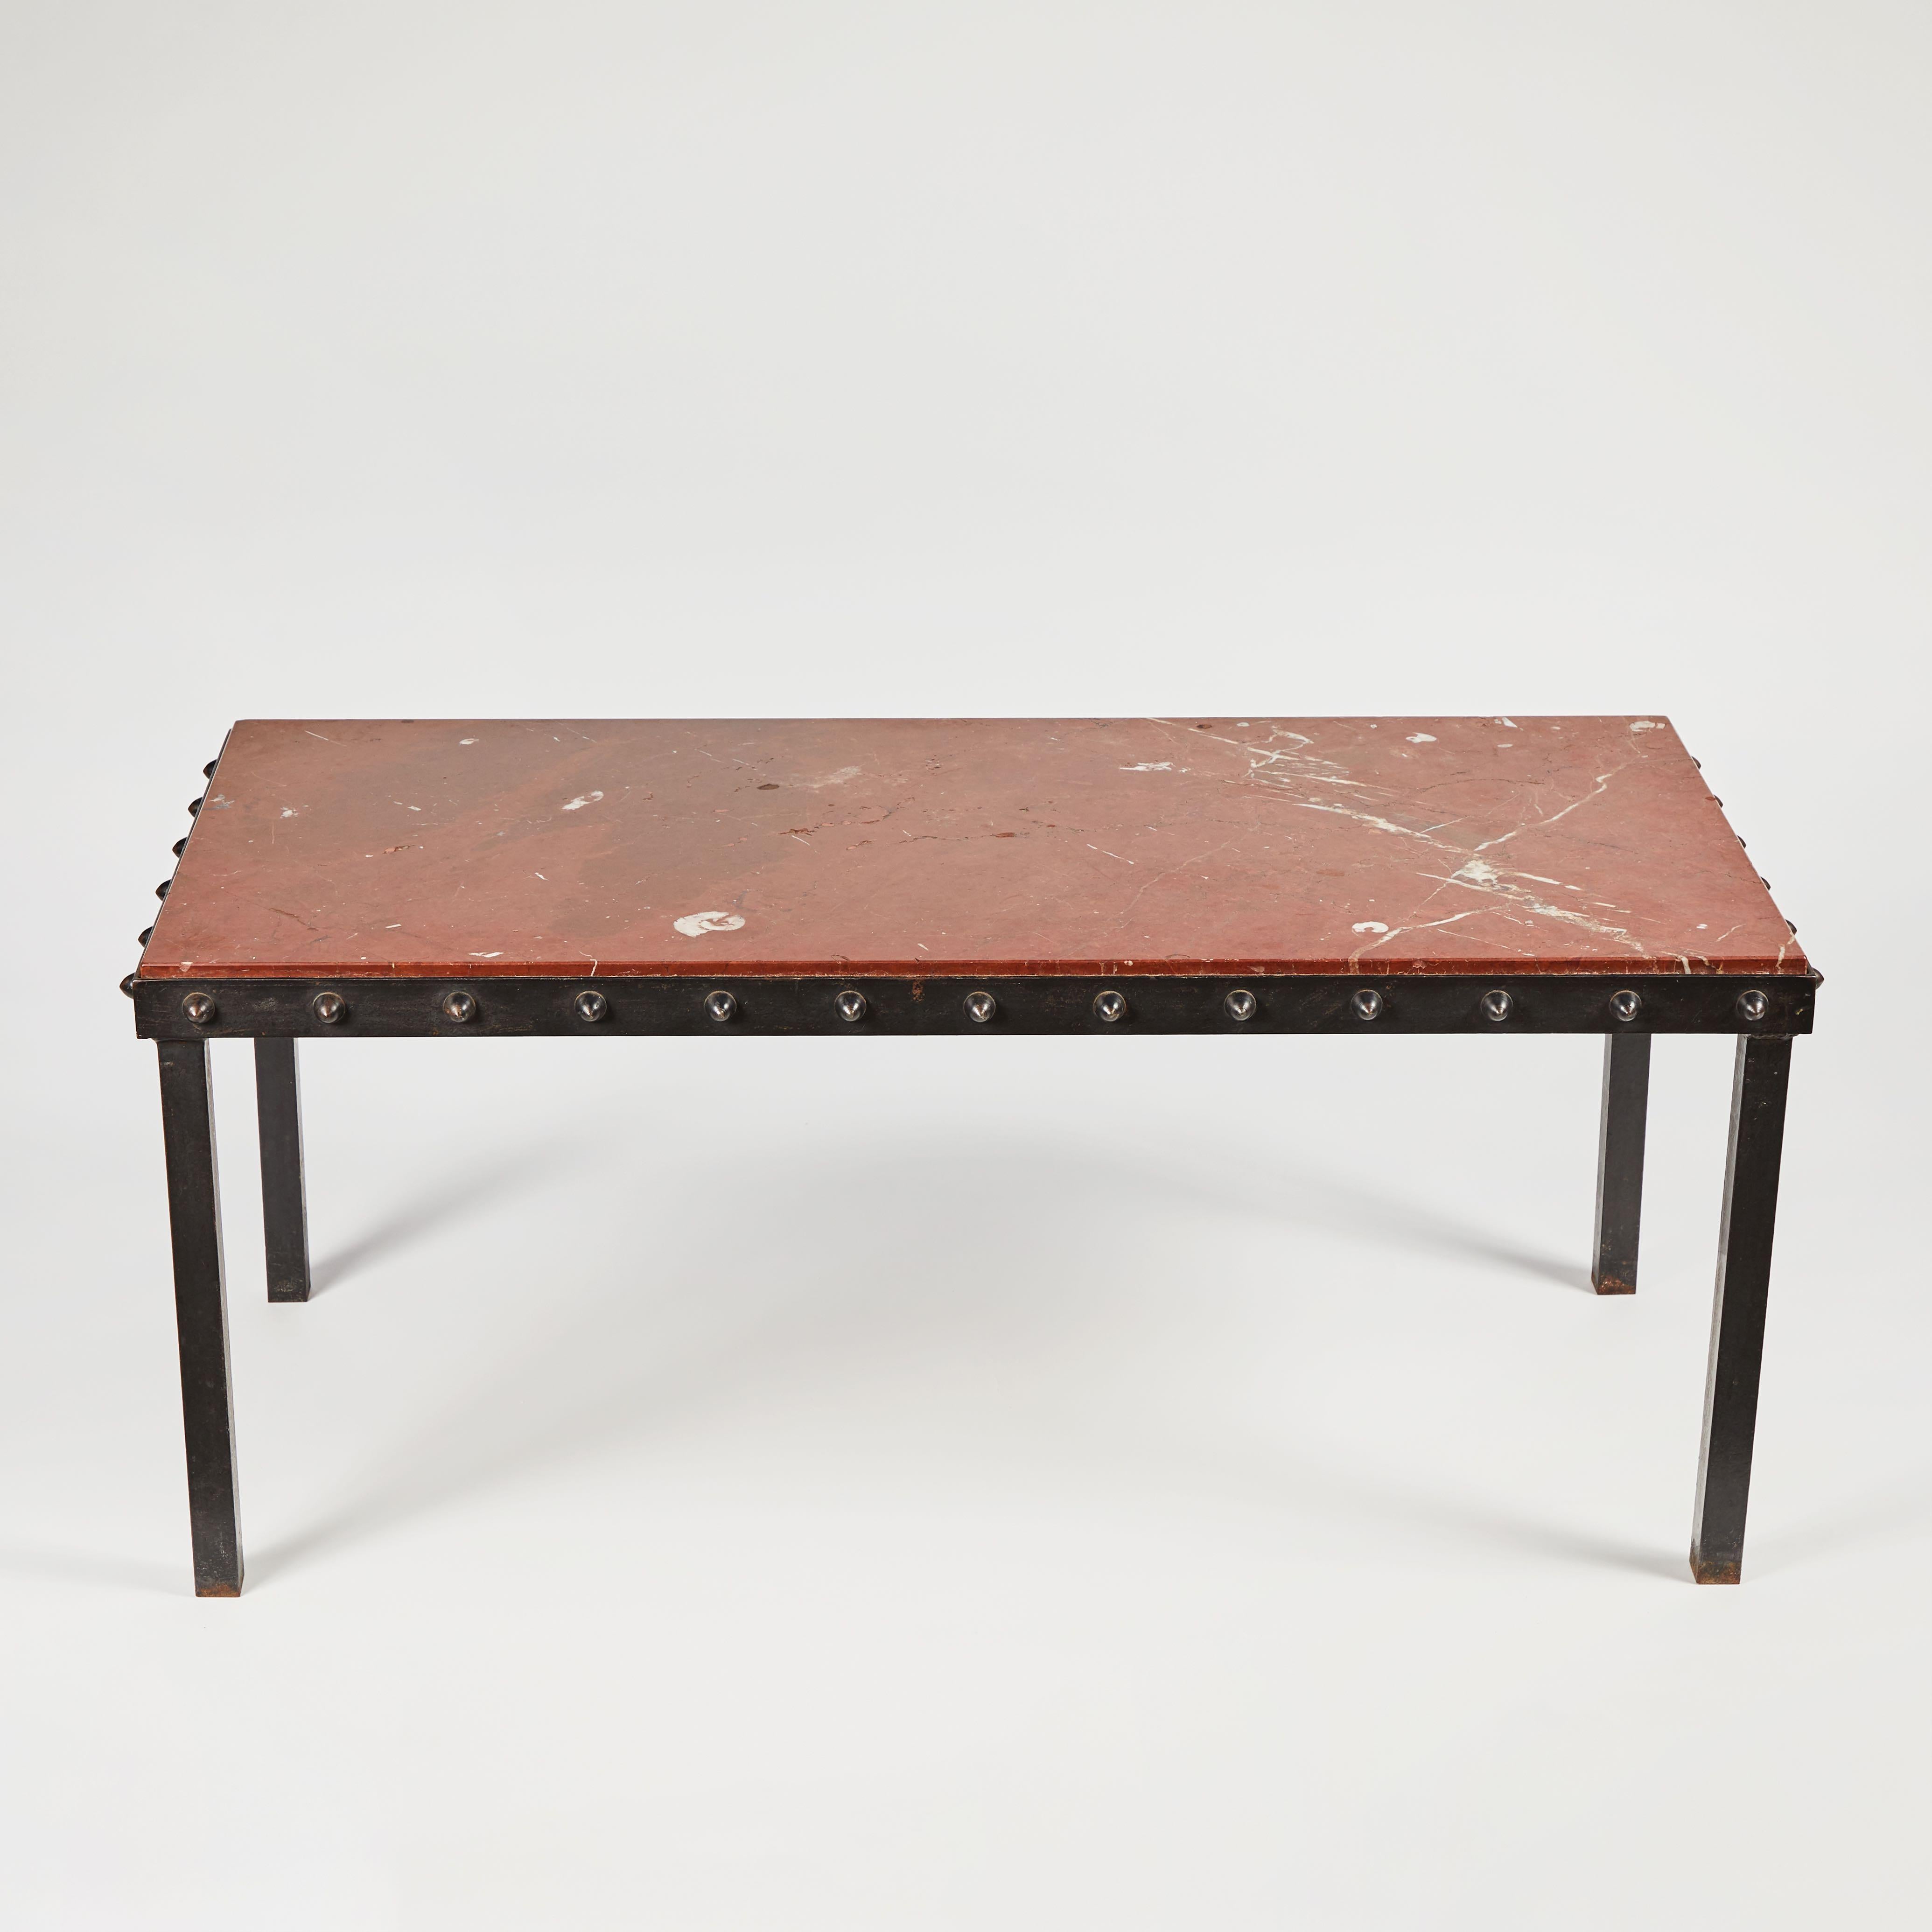 1940s French Marble Top Coffee Table with Iron Legs and Studded Trim 1